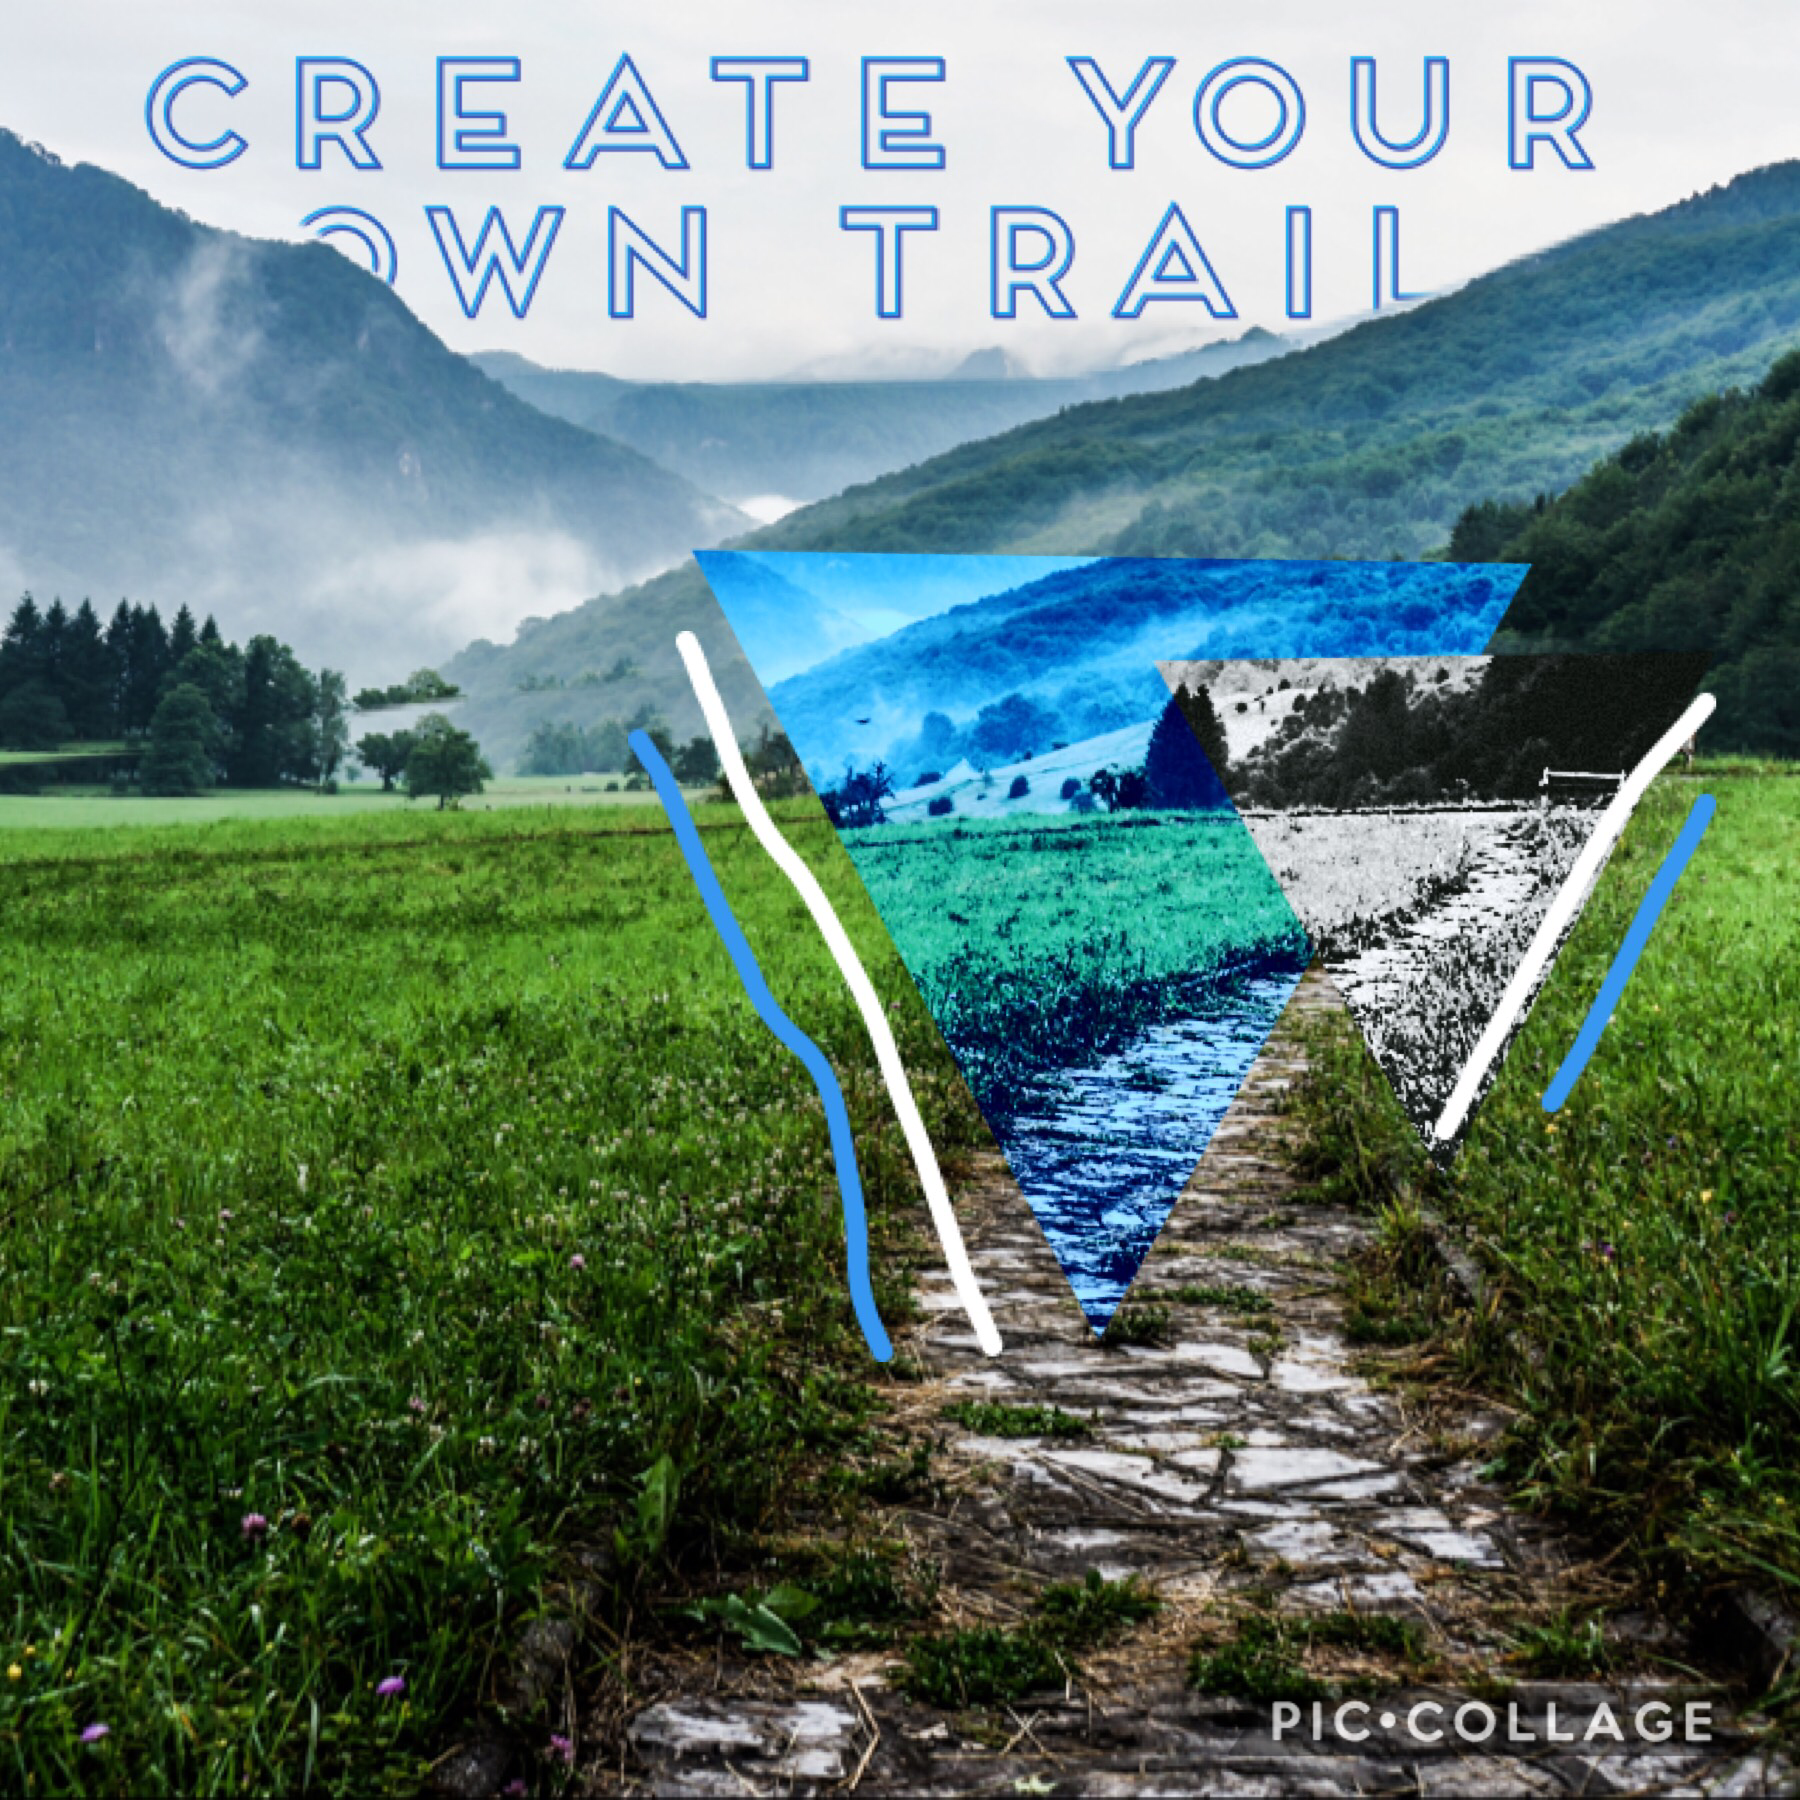 Create your own trail 😃